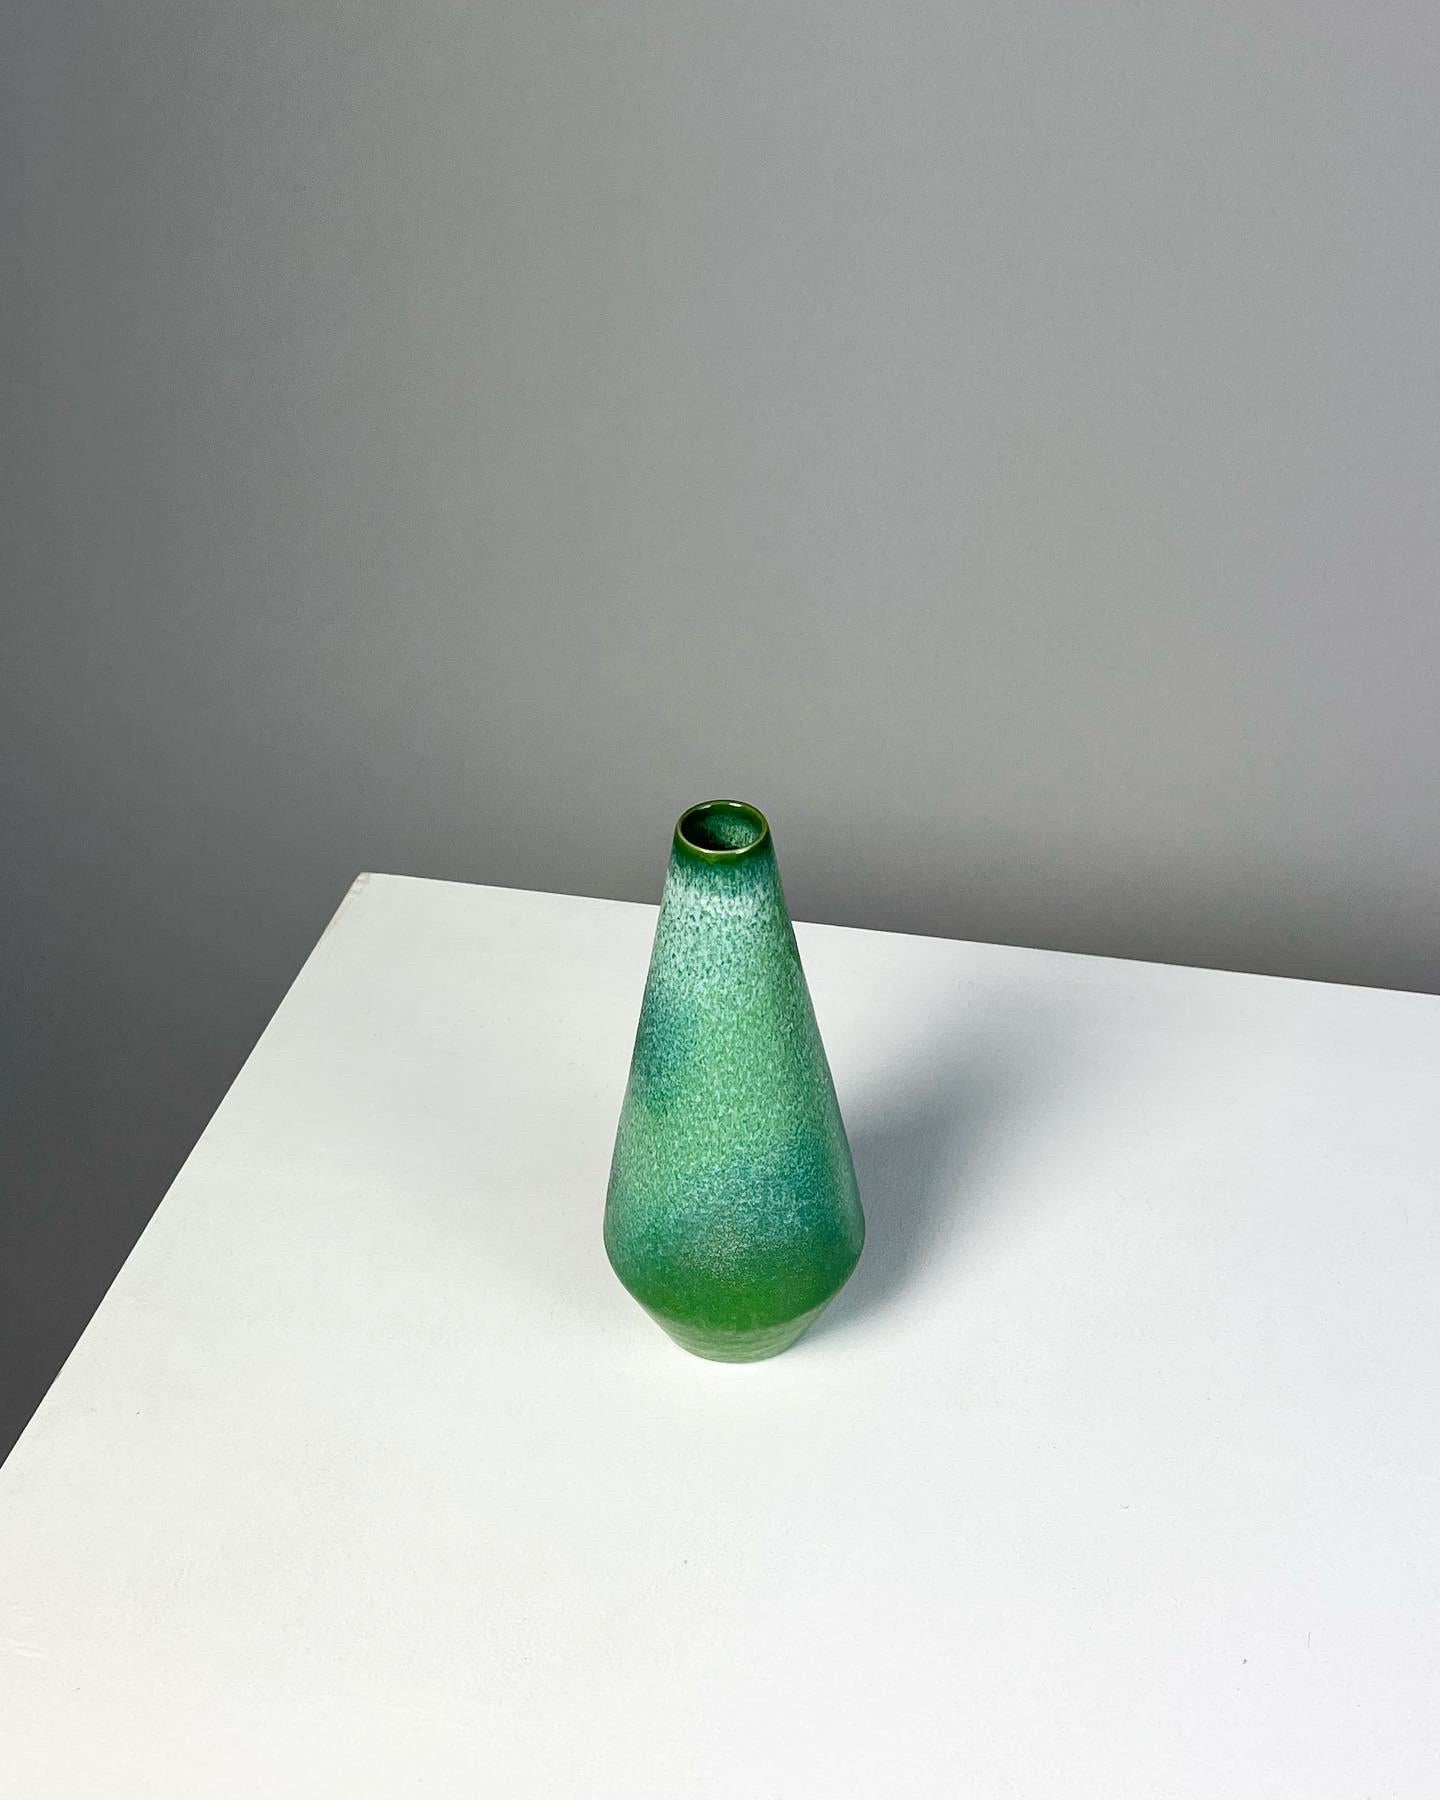 Unique Carl Harry Stalhane Vase Stoneware Rörstrand Sweden Prototype 1960s In Good Condition For Sale In Basel, BS